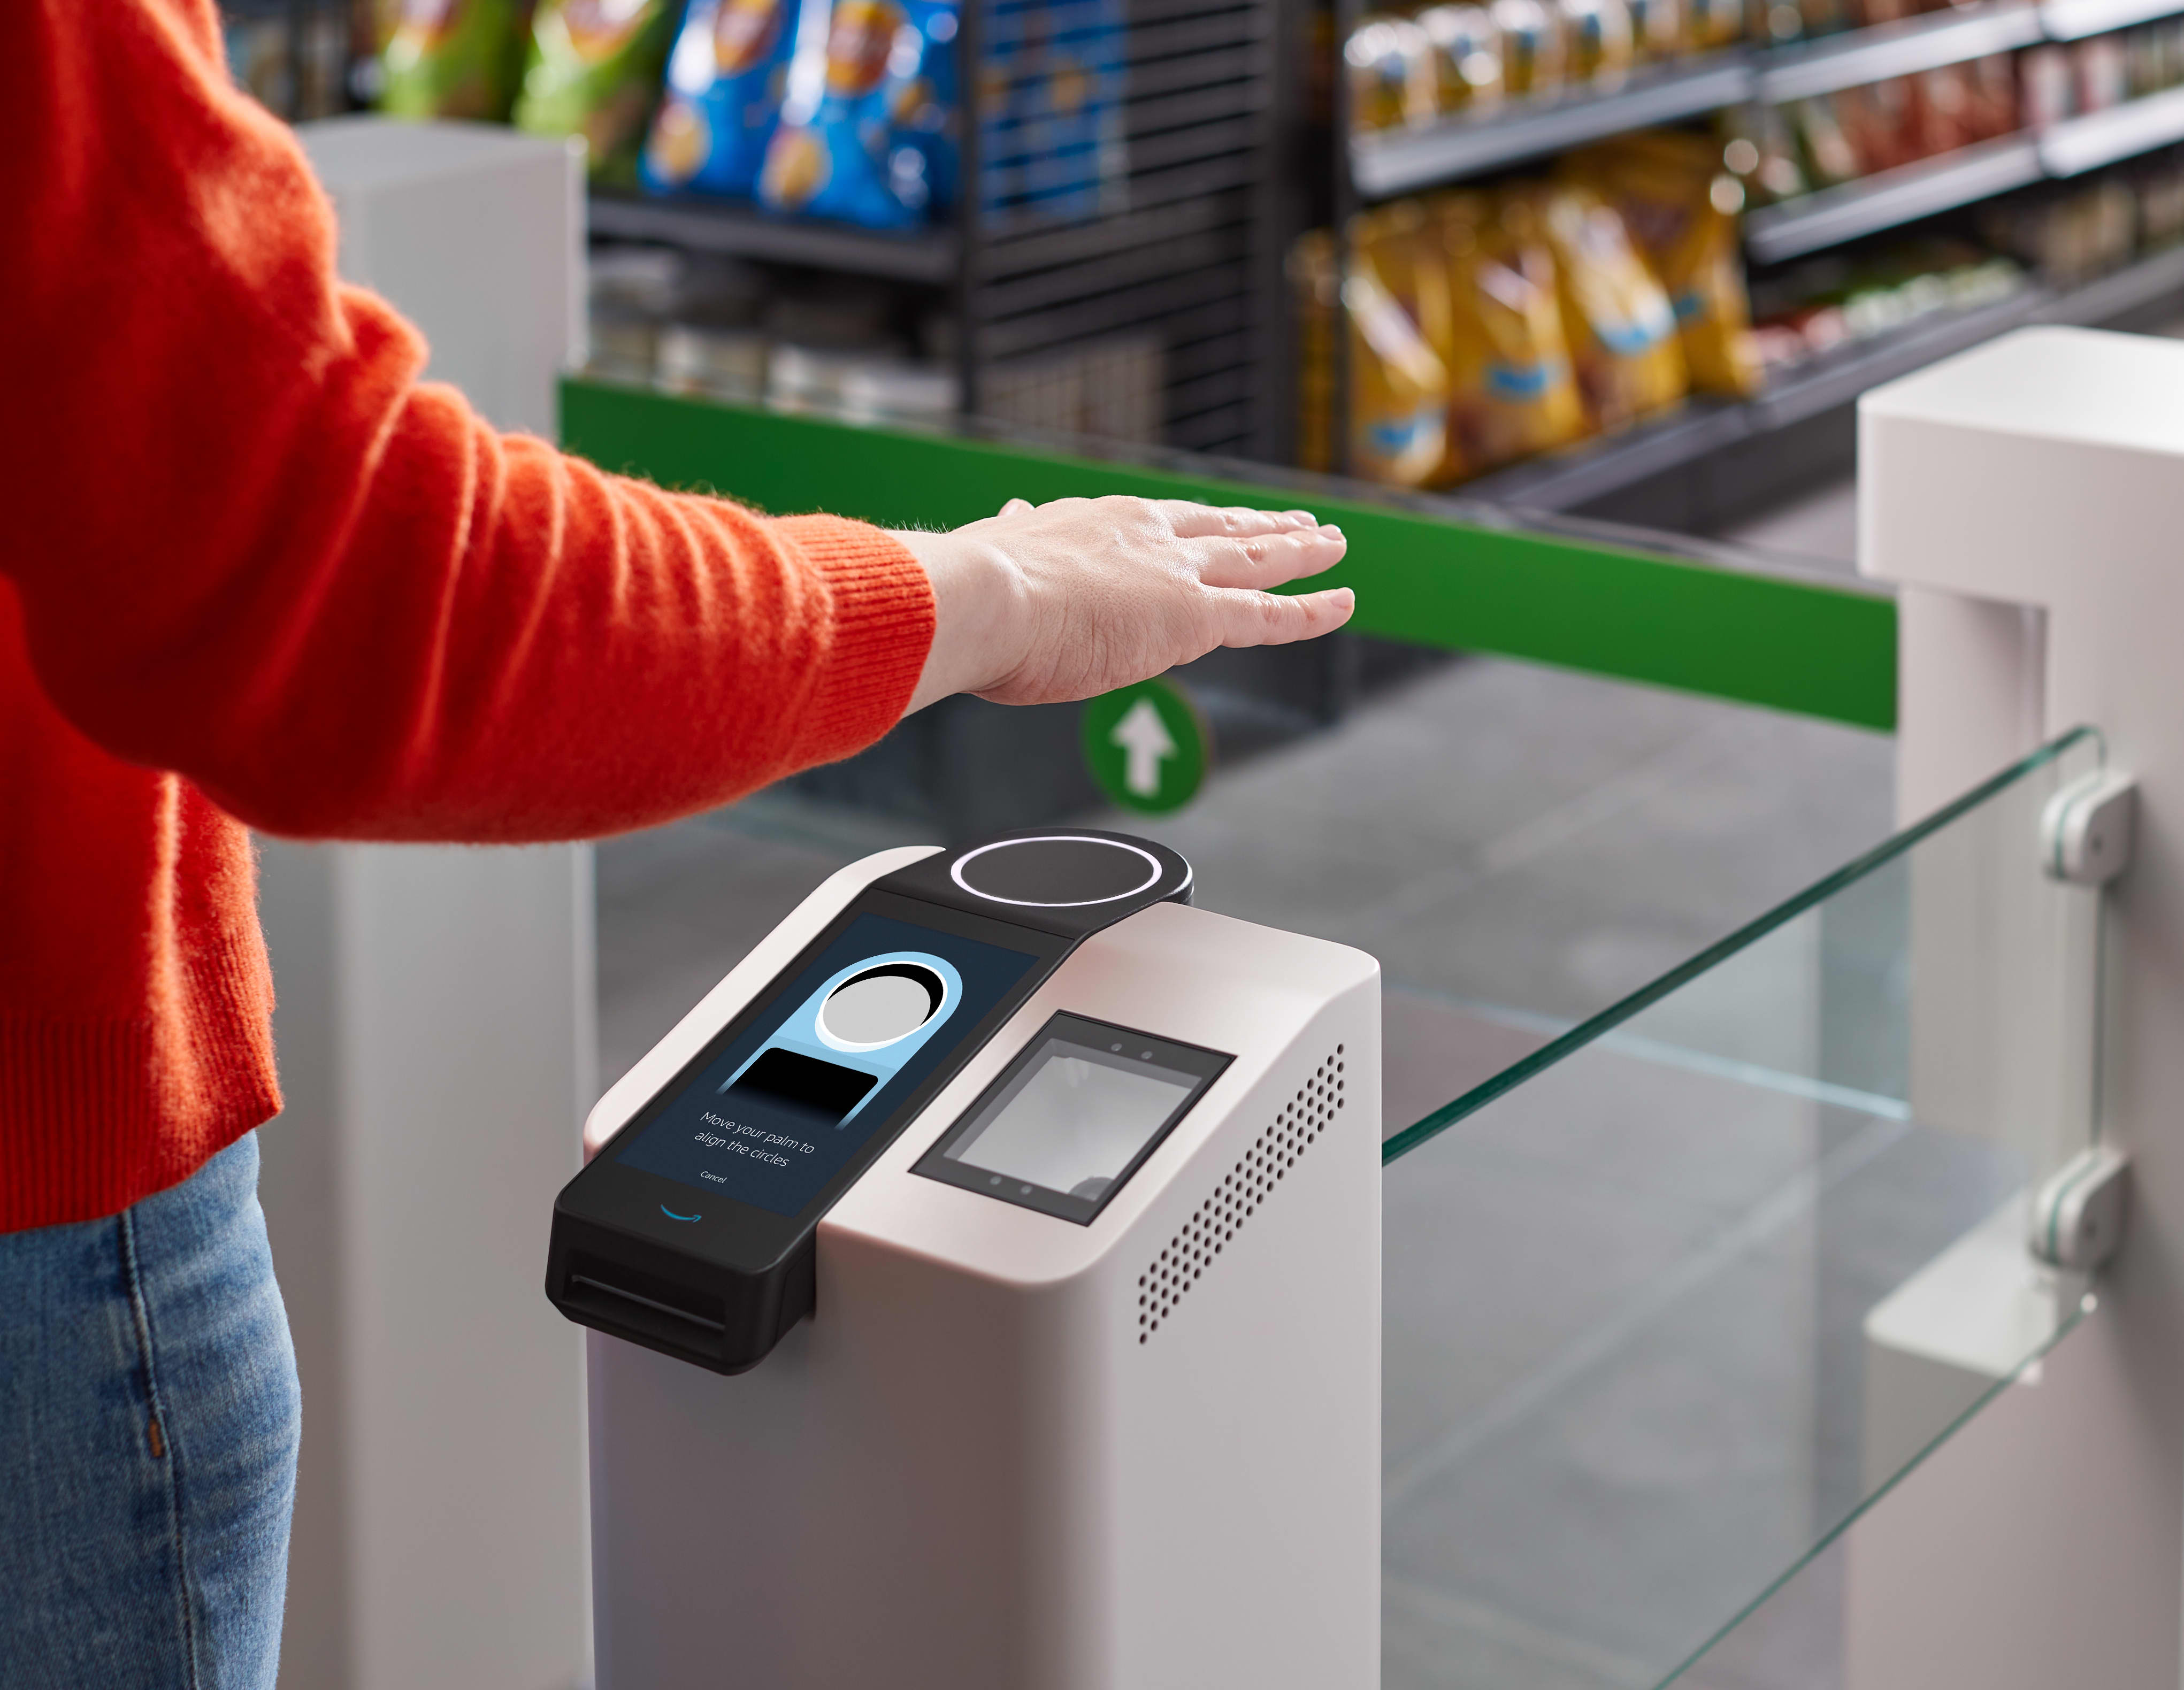 Amazon Whole Foods receives a payment system for palm scanning